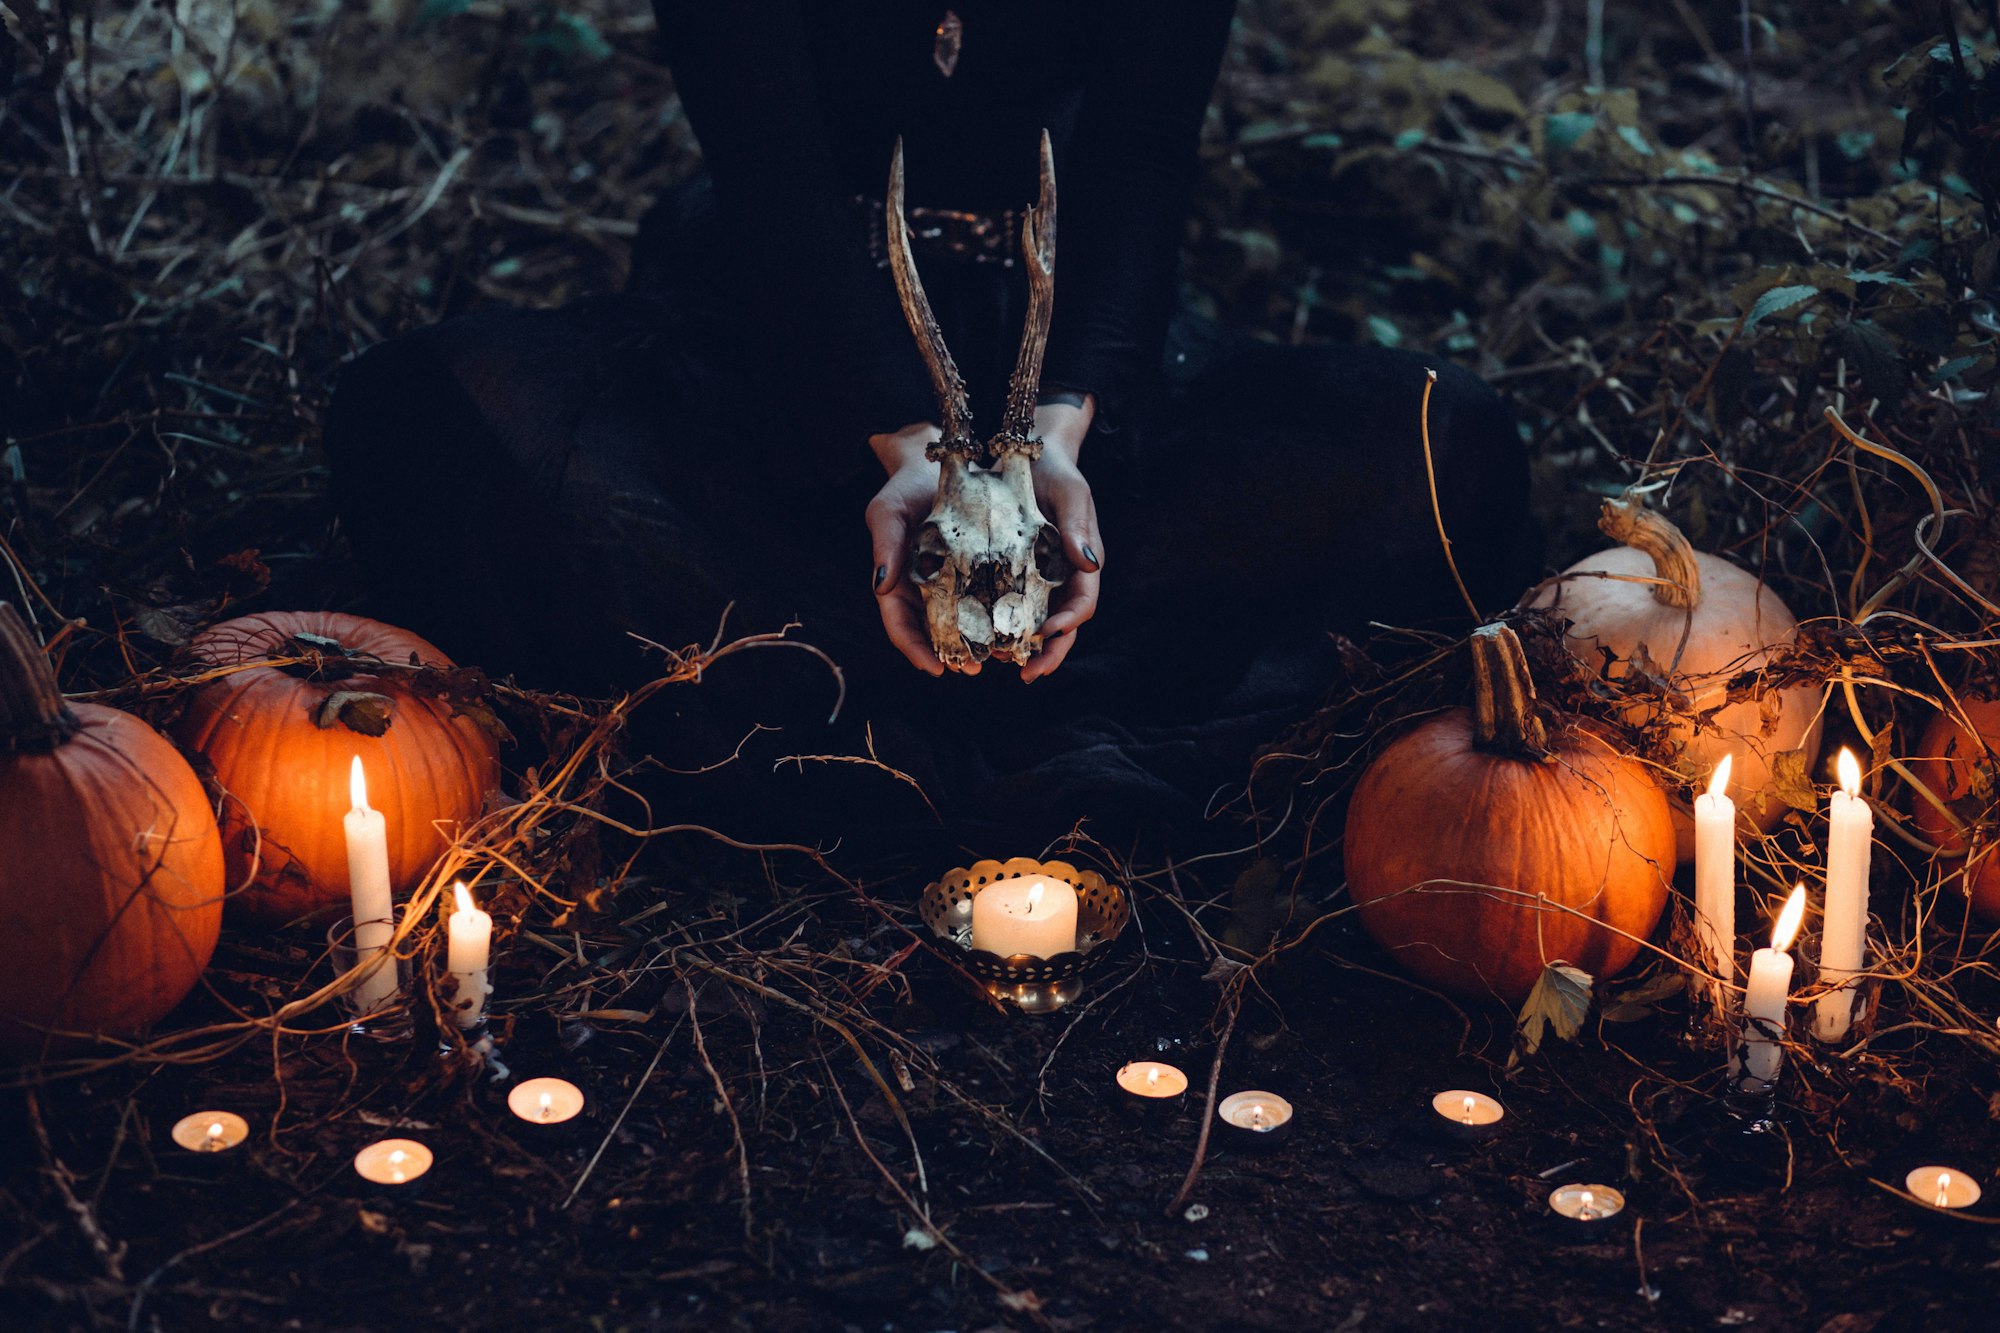 A person holding a skull around an outdoor altar, with pumpkins and candles all around.